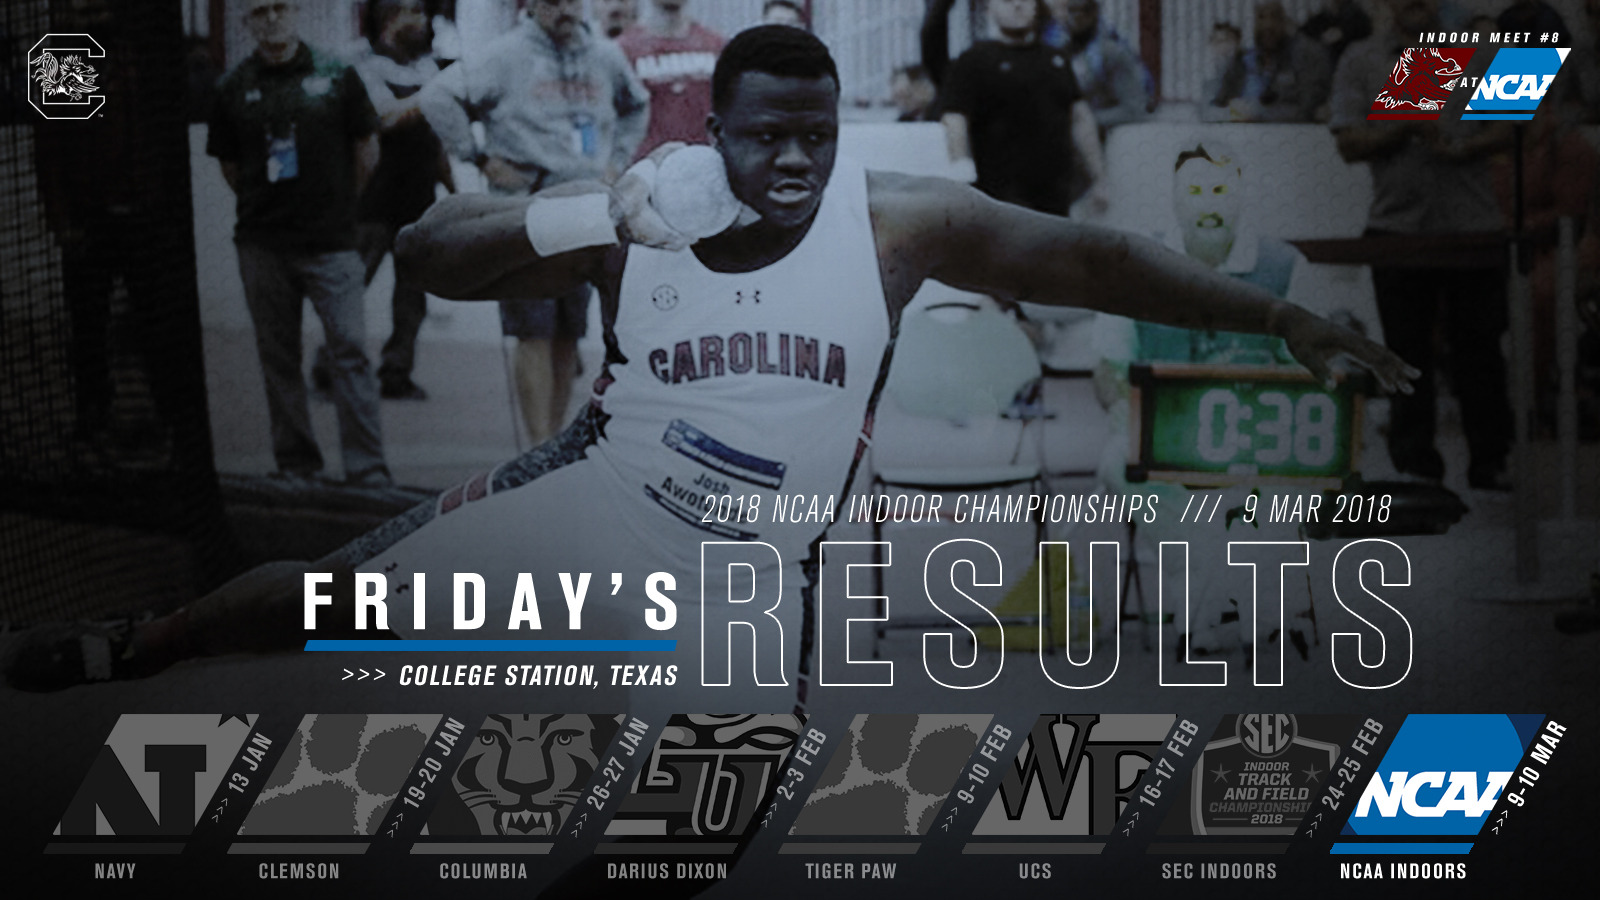 Awotunde Takes Bronze On Day One Of NCAA Indoor Championships